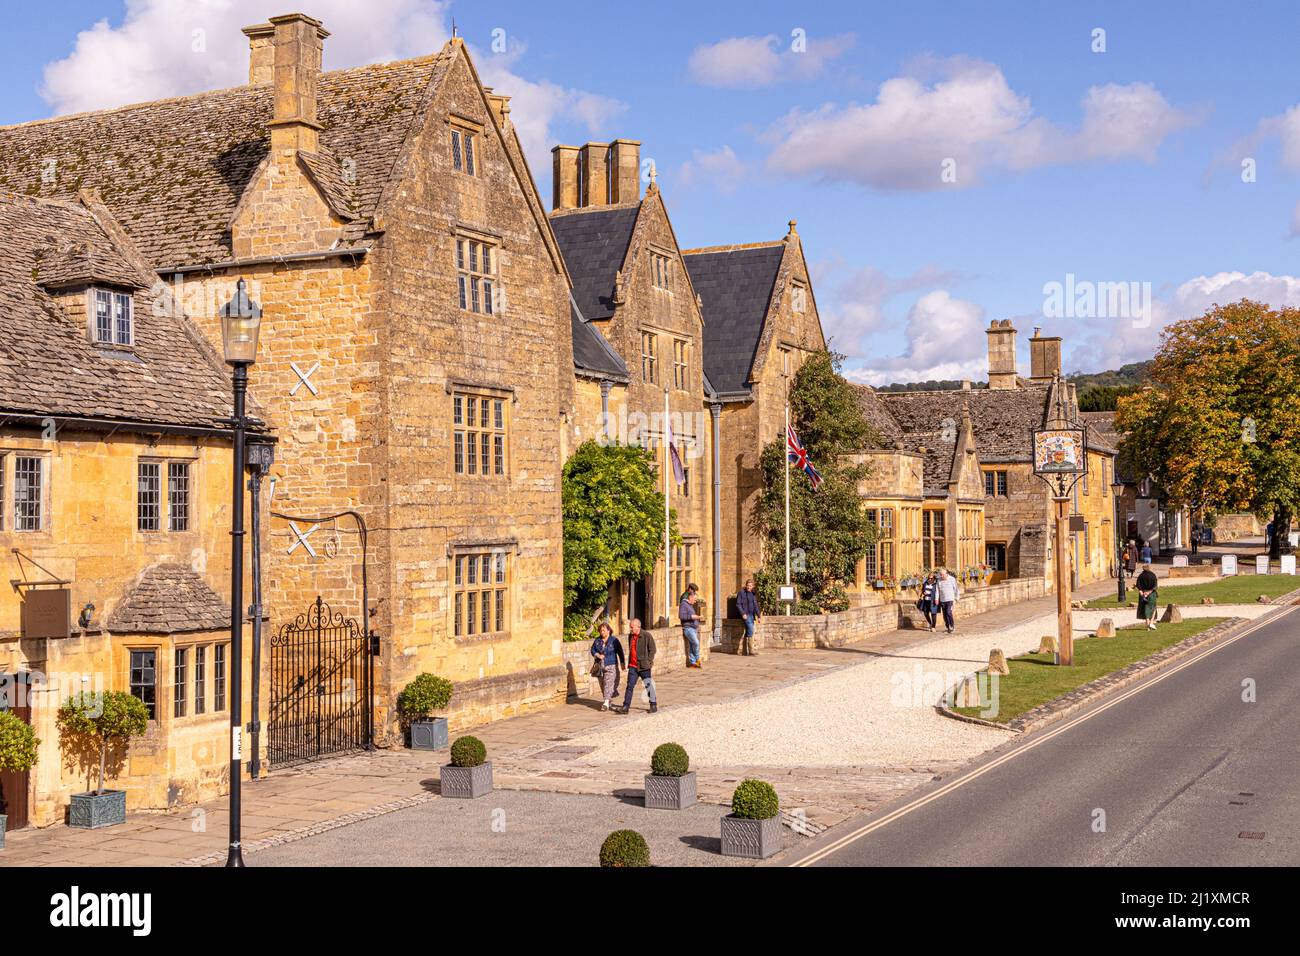 Das Lygon Arms Hotel in der High Street des Cotswold-Dorfes Broadway, Worcestershire, England Stockfoto